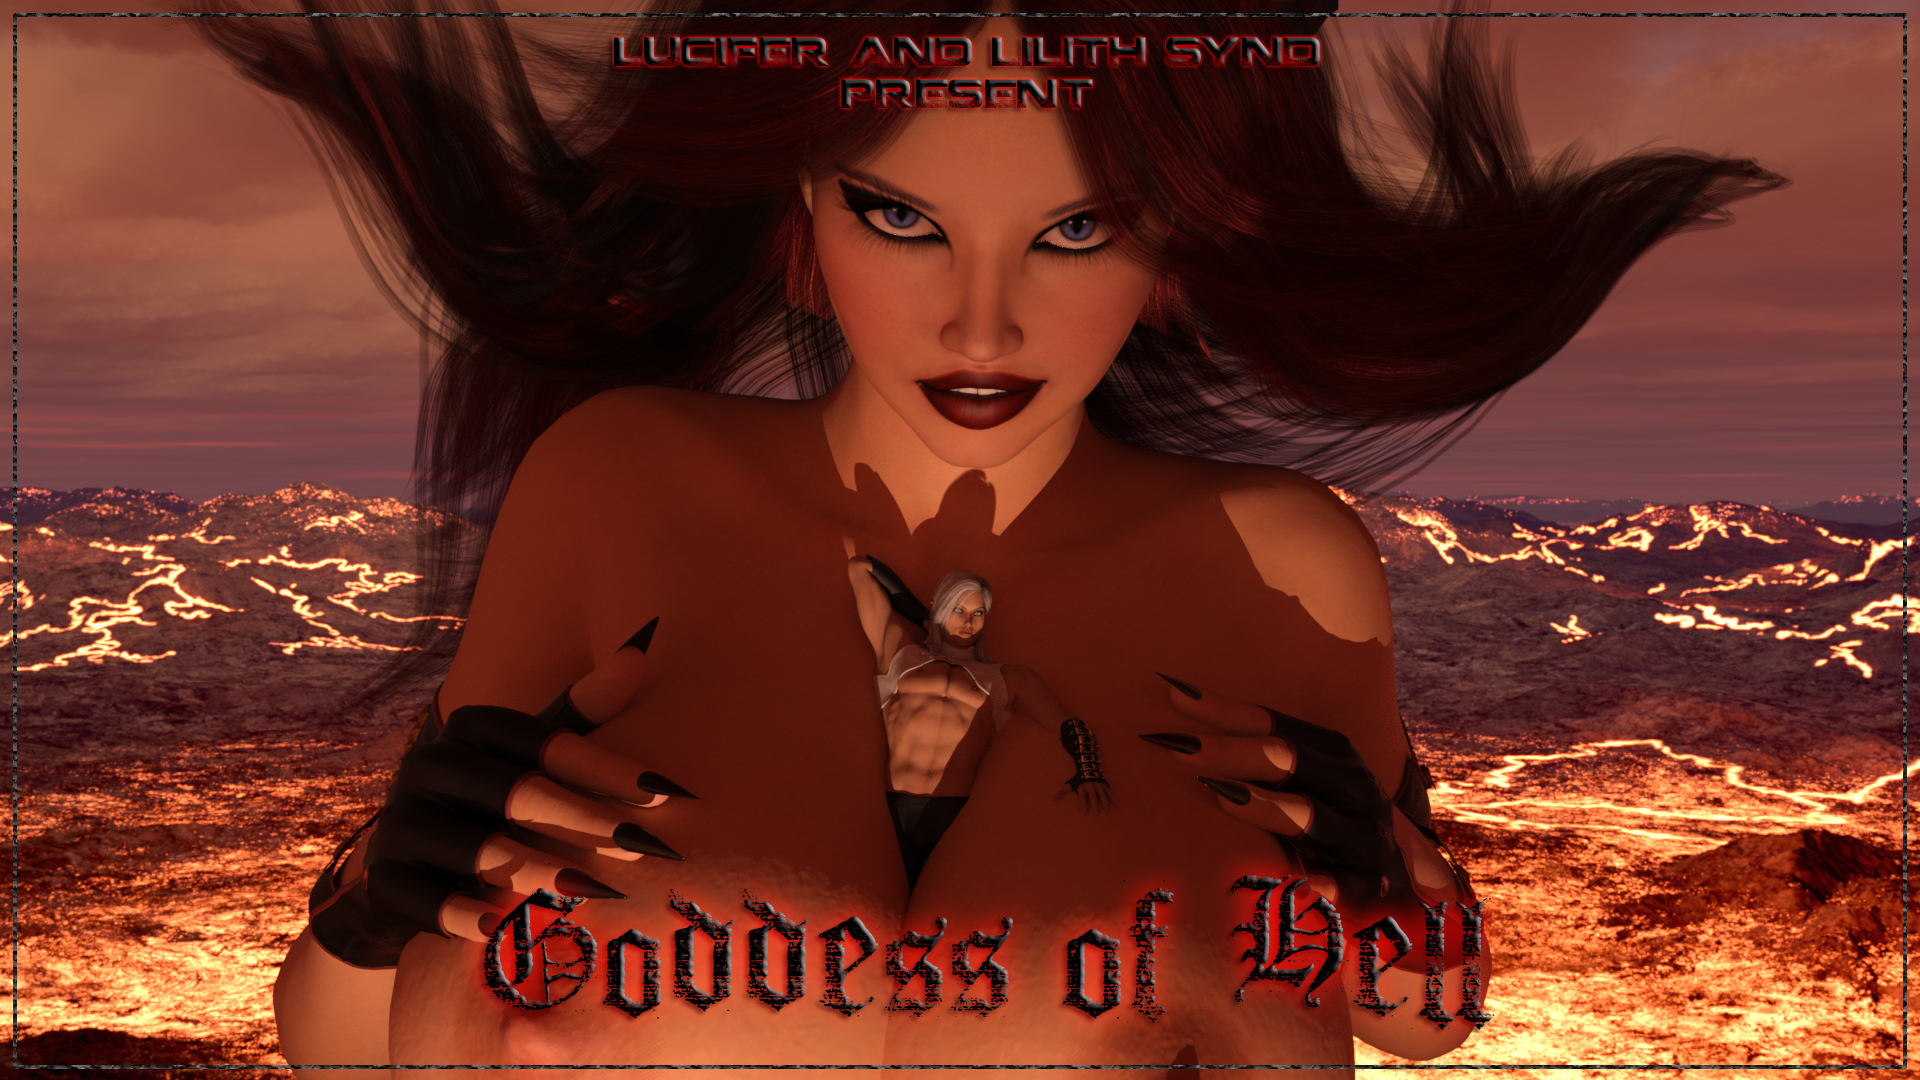 Lucifer Synd - Goddess of Hell